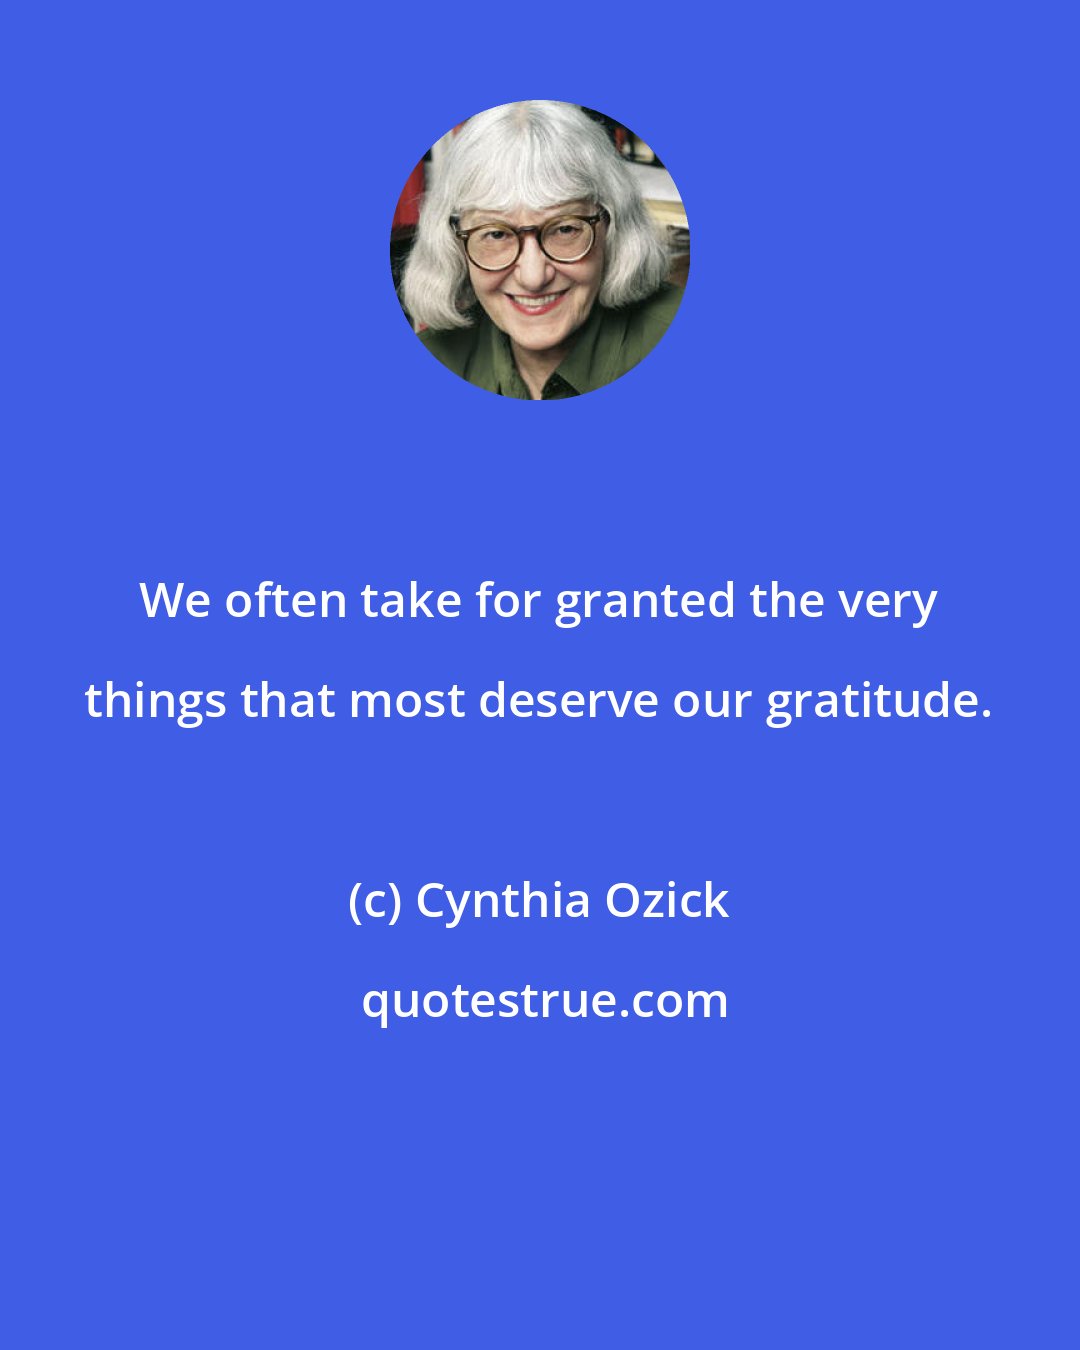 Cynthia Ozick: We often take for granted the very things that most deserve our gratitude.